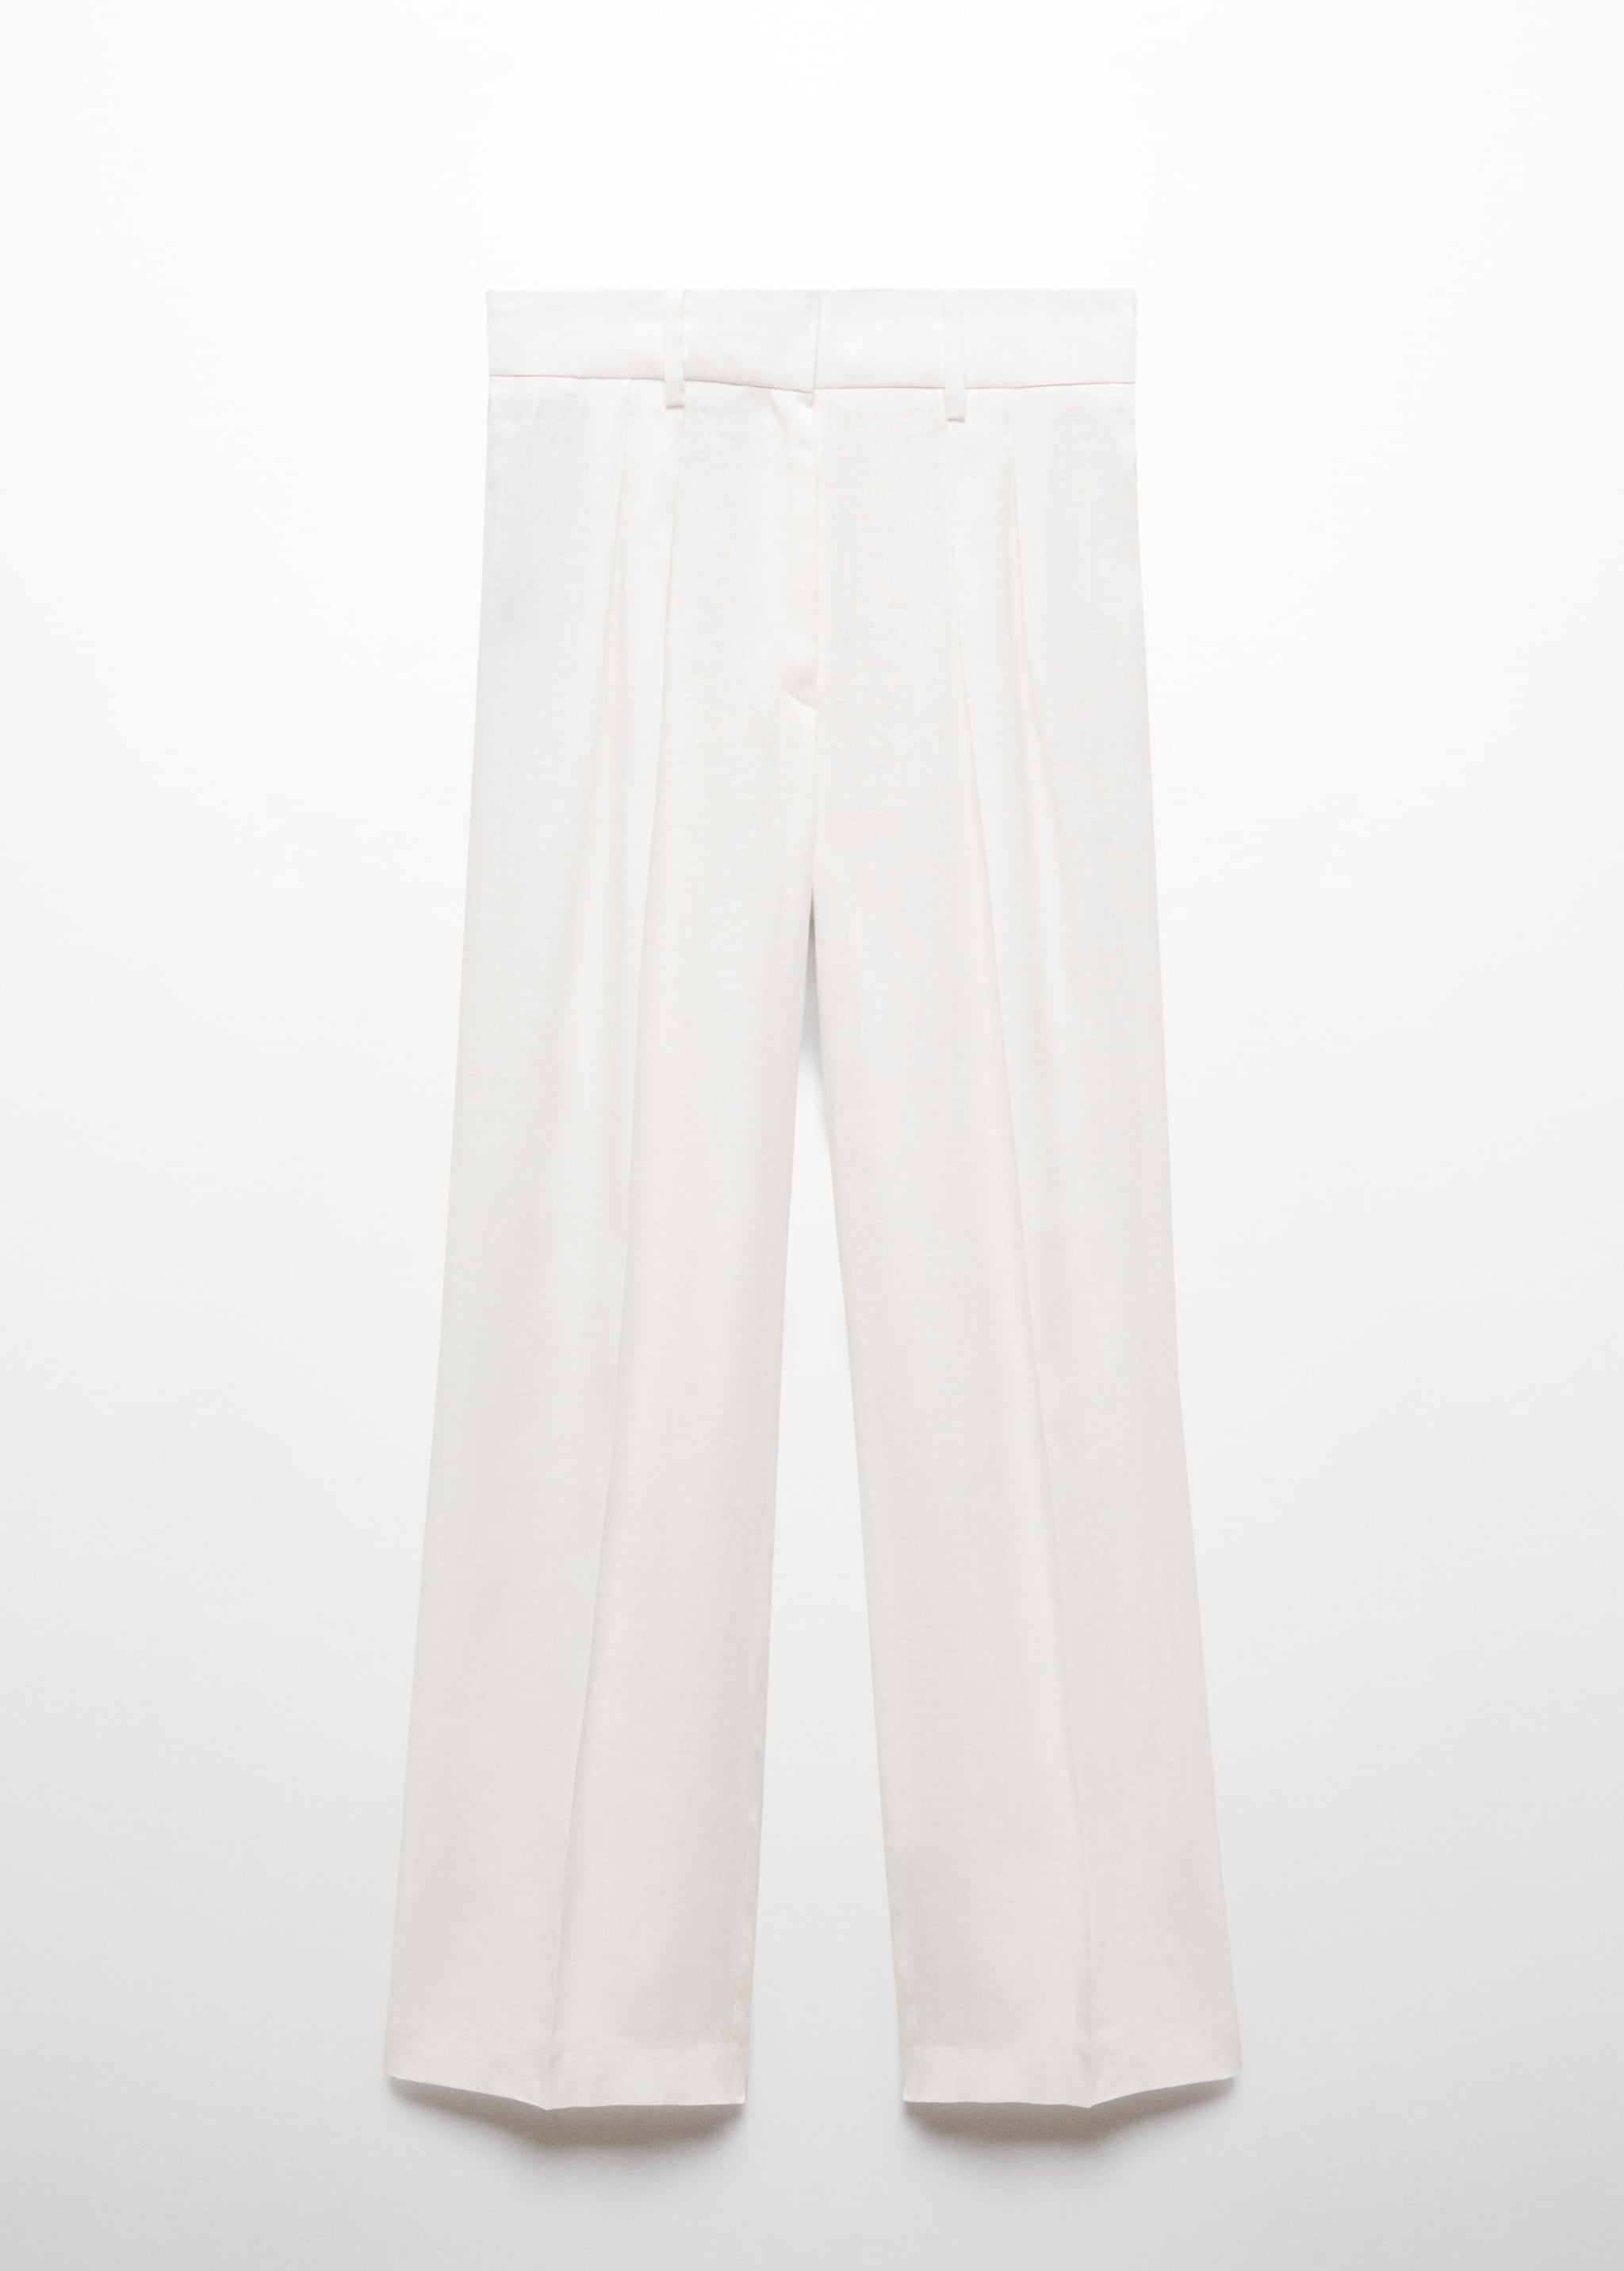 100% linen wideleg trousers - Article without model